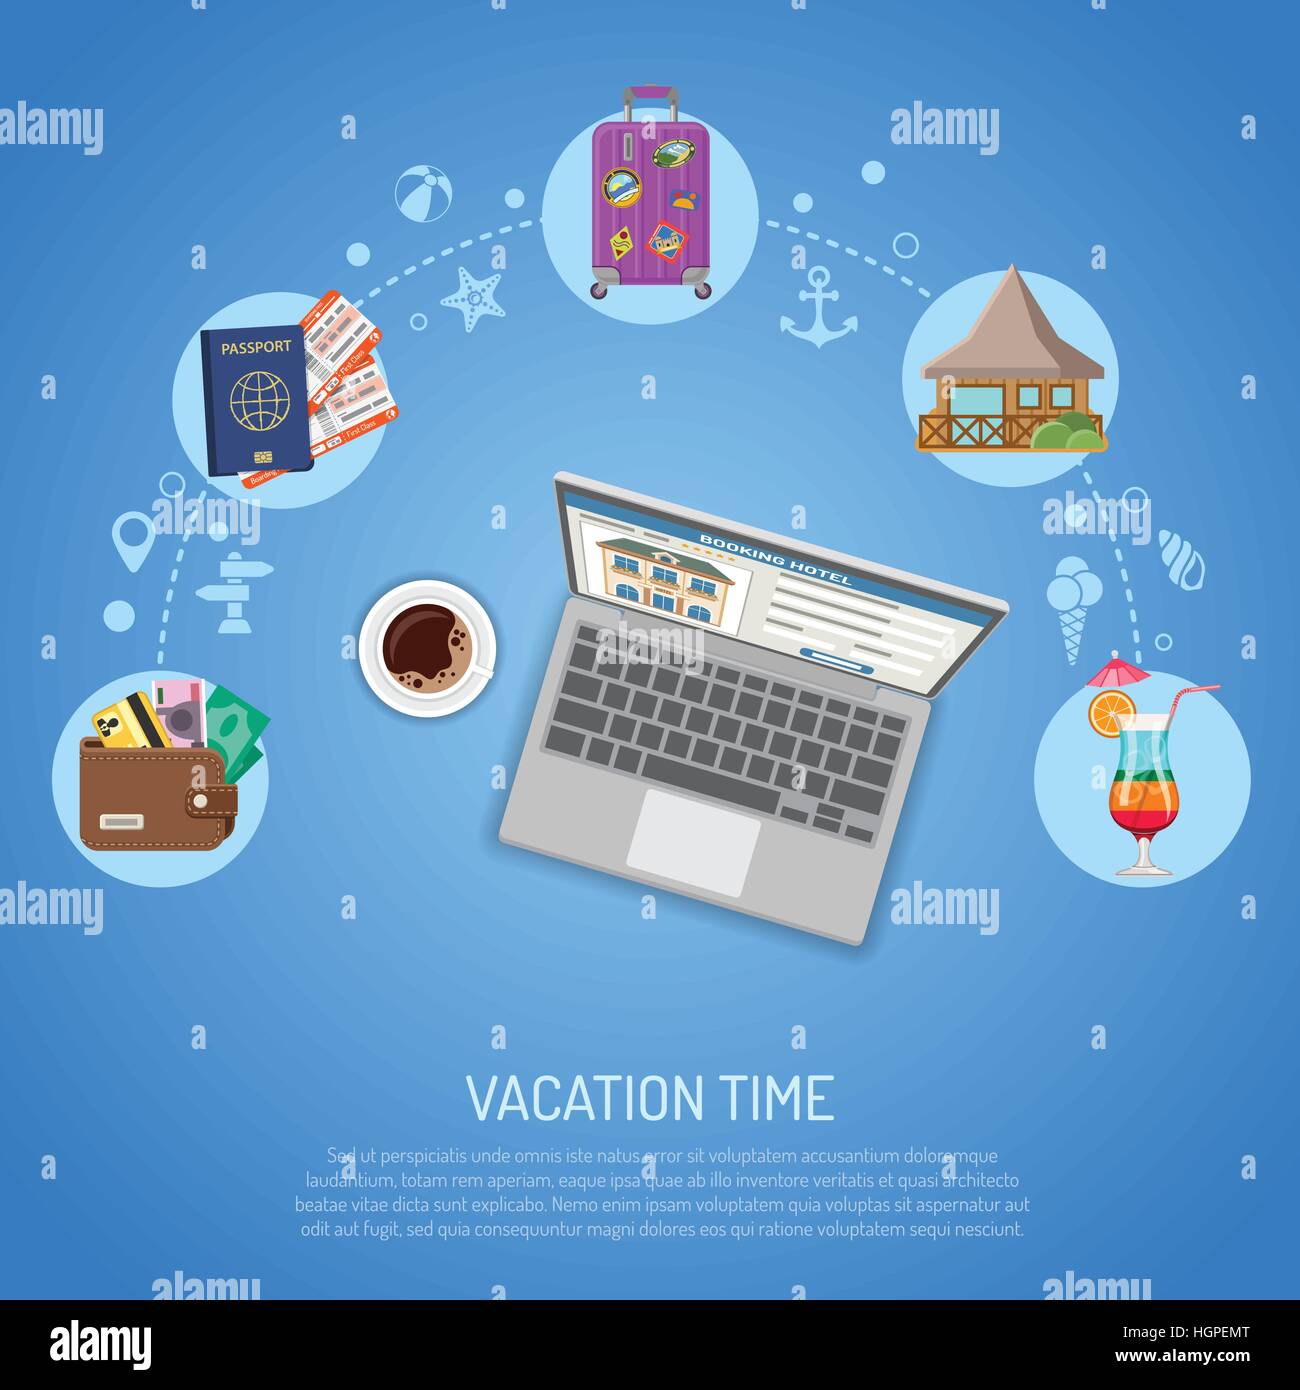 Vacation and Tourism Concept Stock Vector